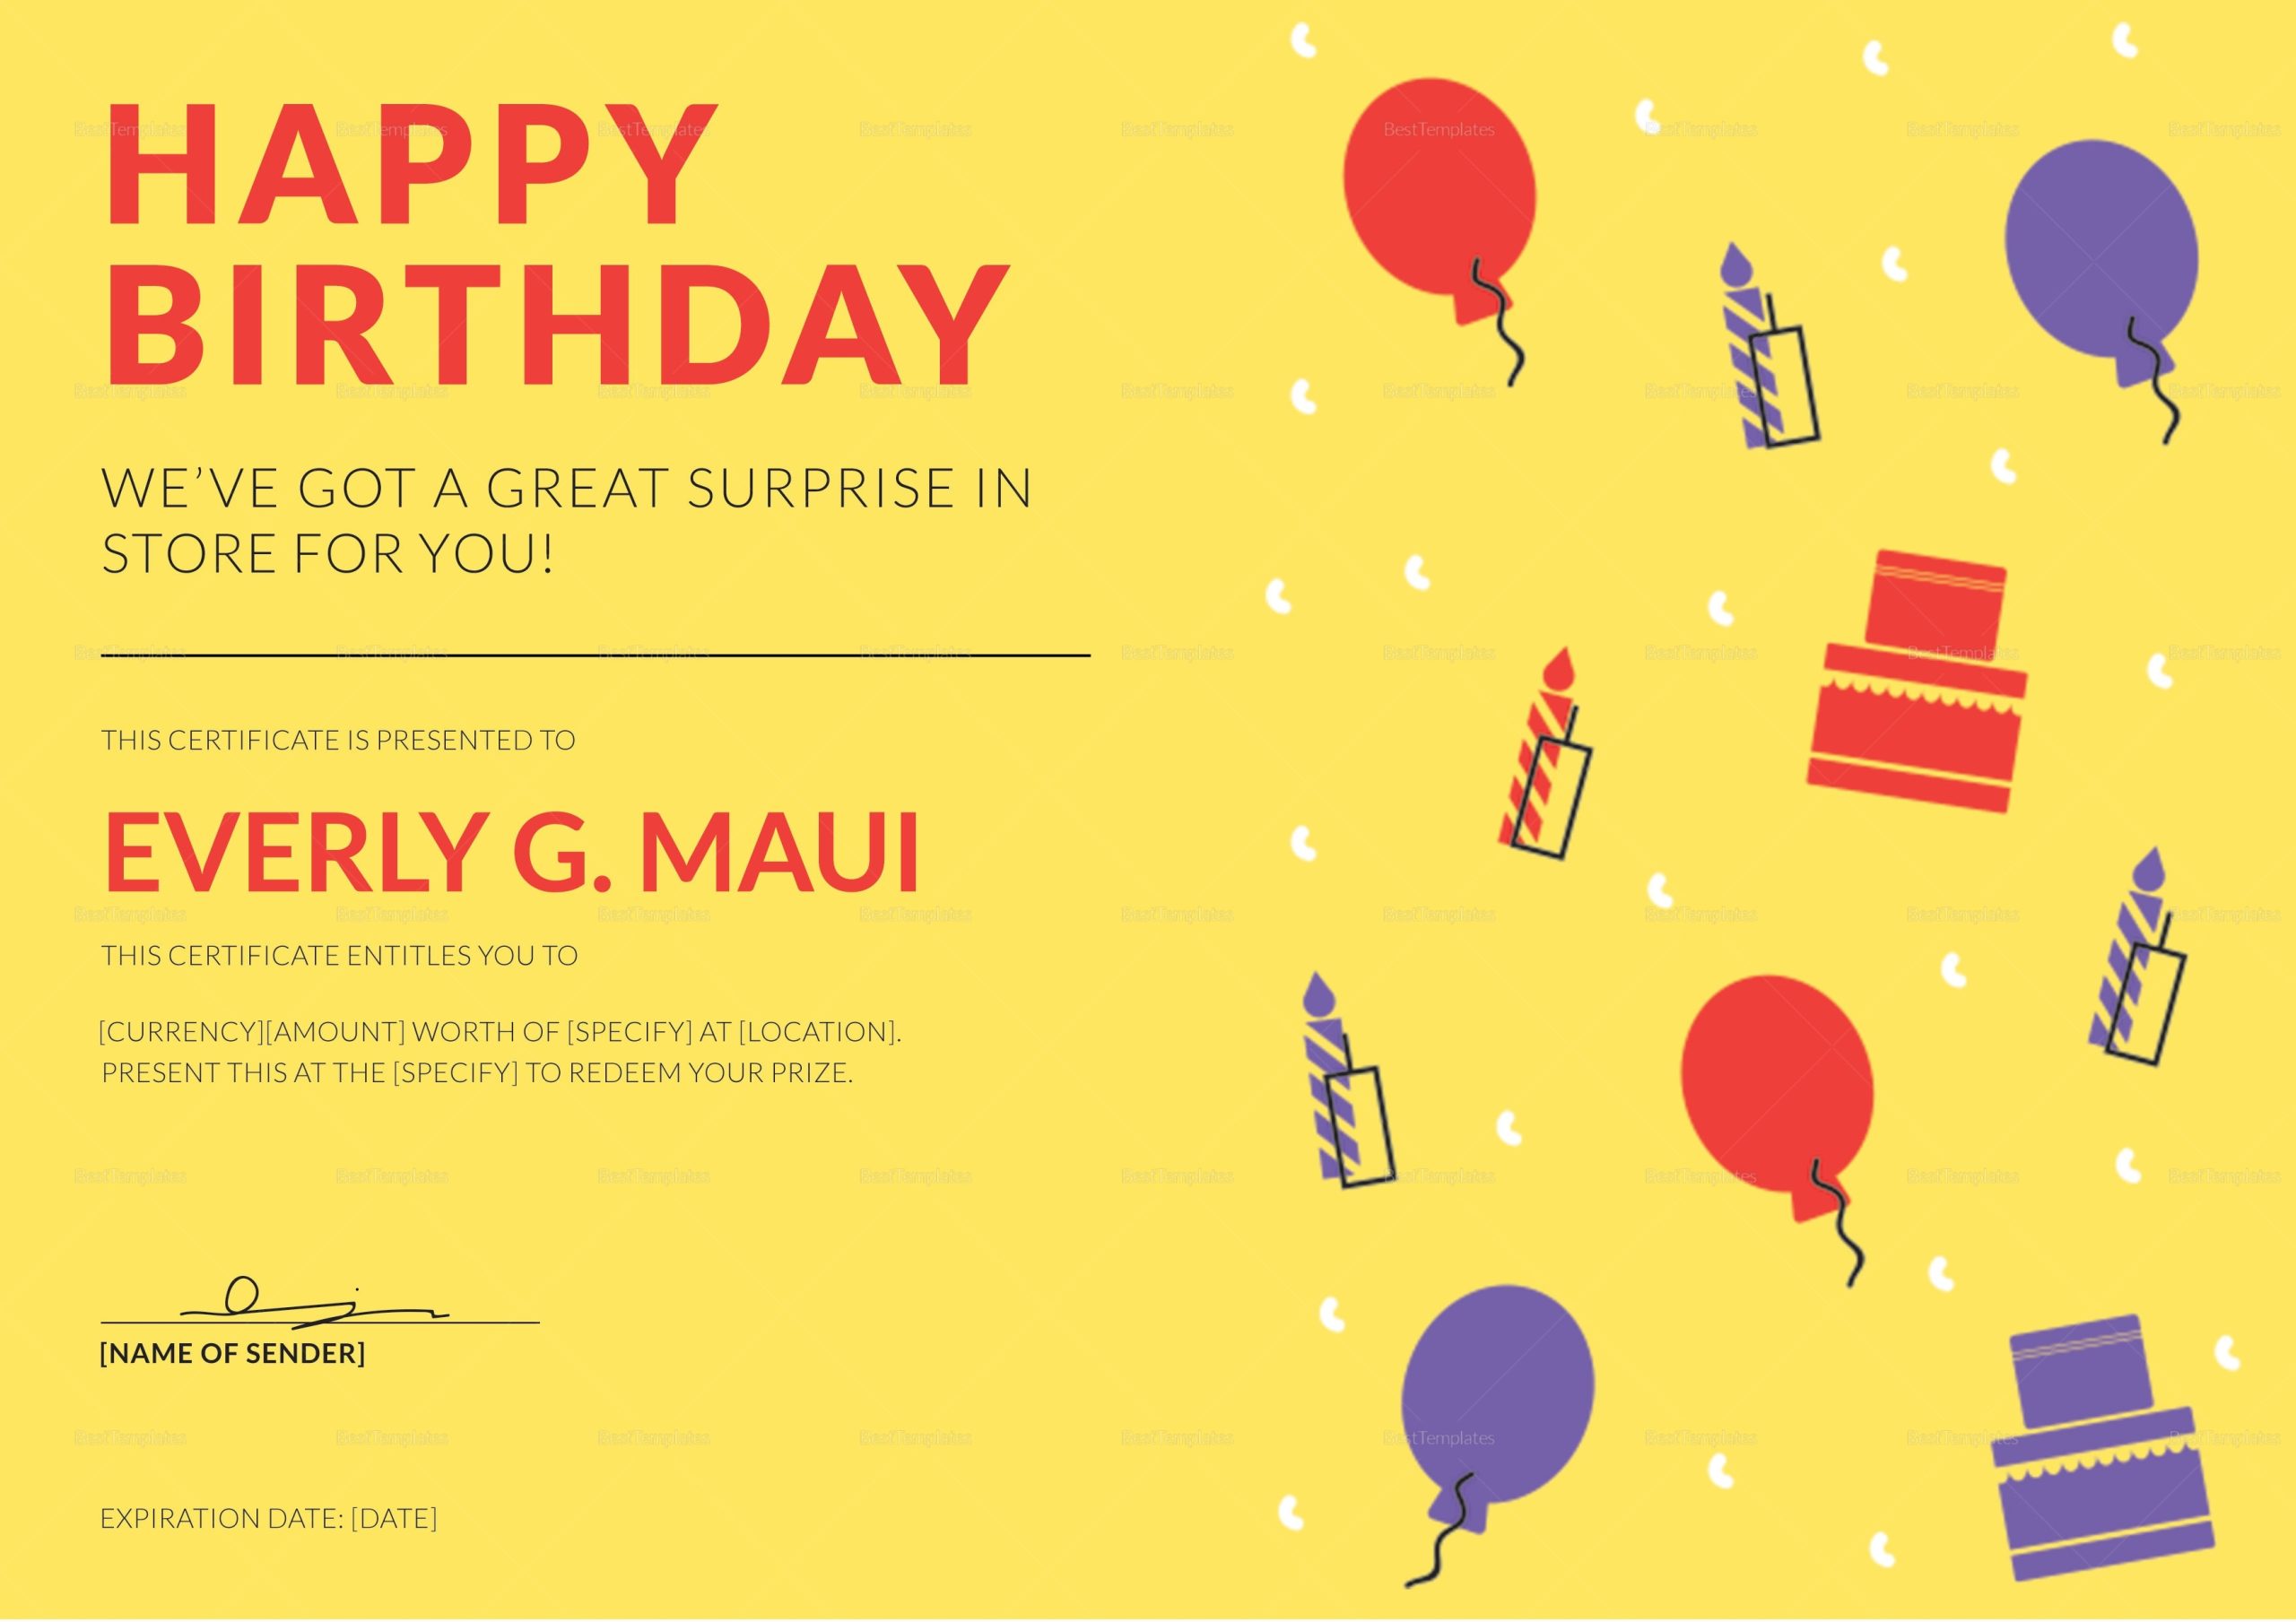 Birthday Gift Certificate Design Template In Psd, Word, Illustrator Intended For Present Certificate Templates